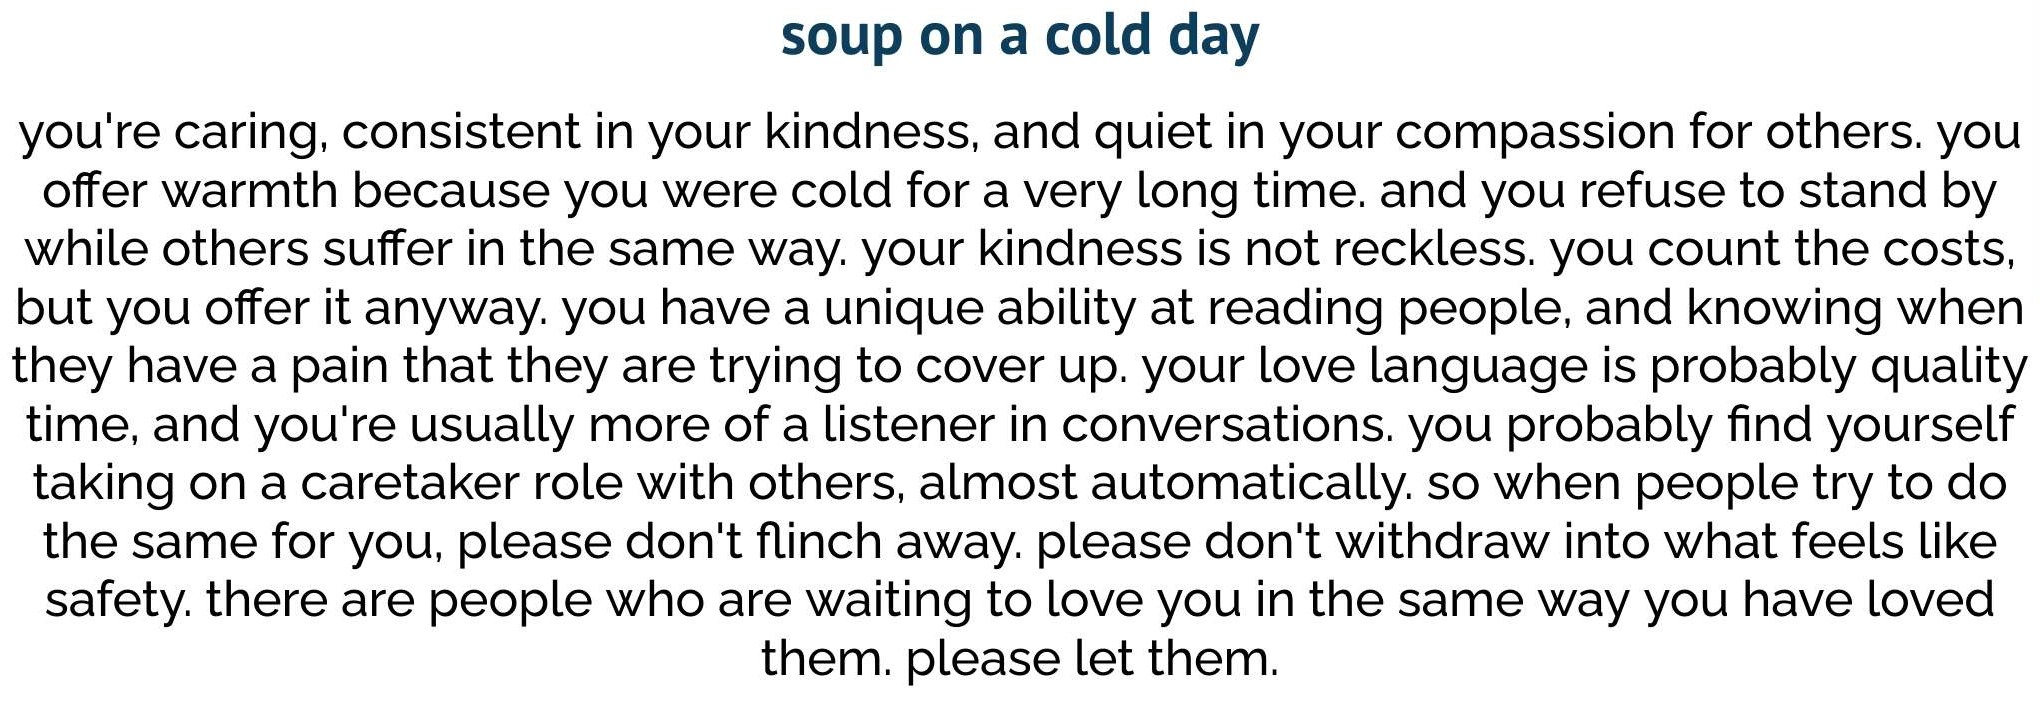 i am soup on a cold day. what are you?